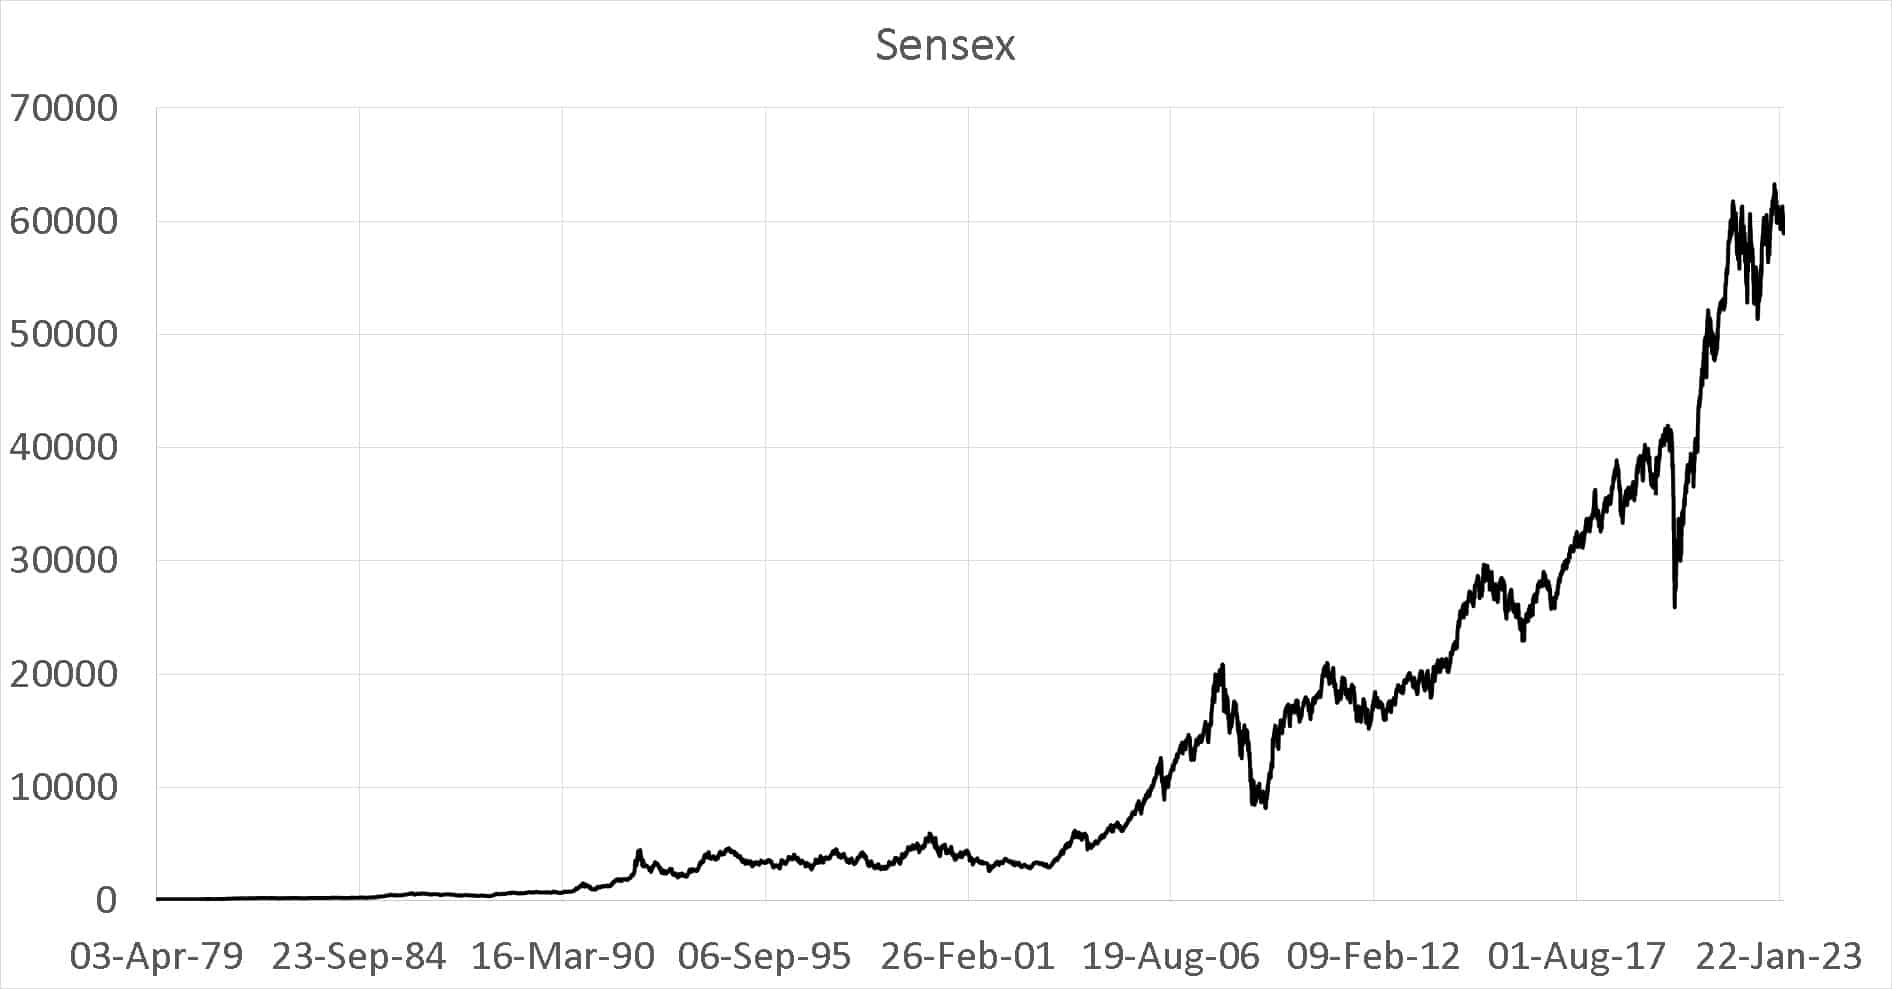 Sensex price chart in normal scale